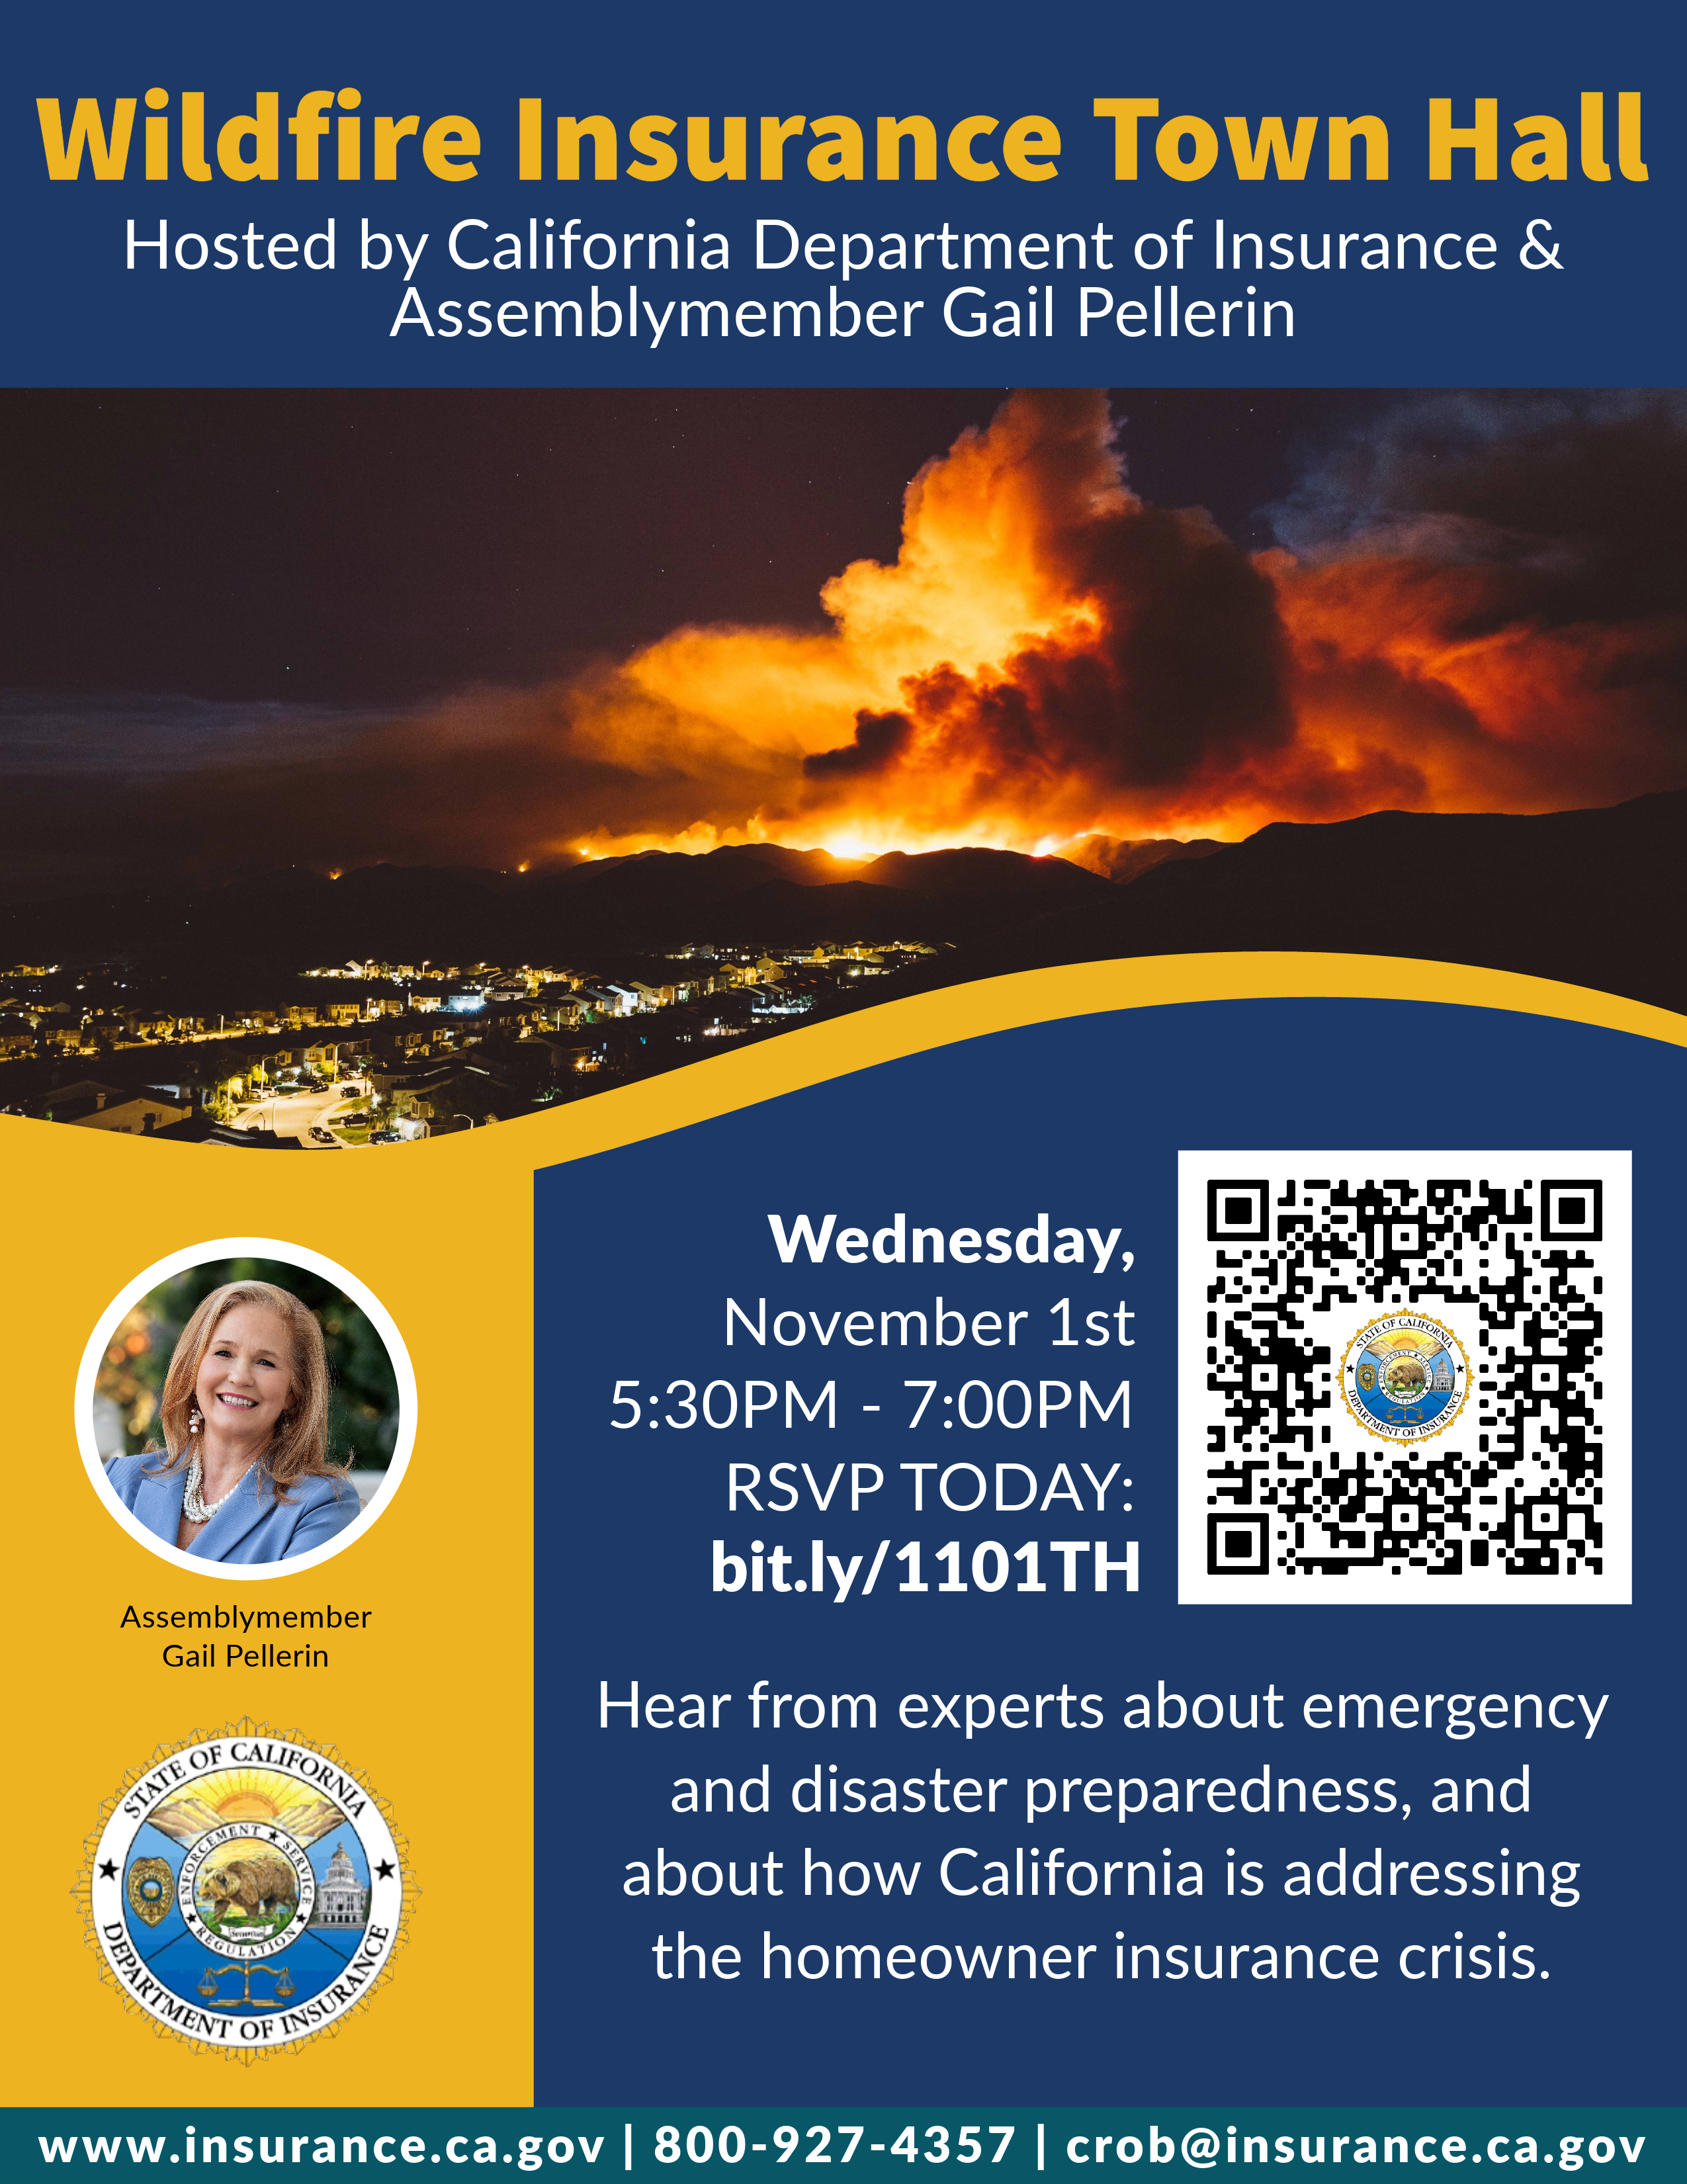 Wildfire Insurance Town Hall Hosted by California Department of Insurance &amp; Assemblymember Gail Pellerin - Hear from experts about emergency and disaster preparedness, and about how California is addressing the homeowner insurance crisis 